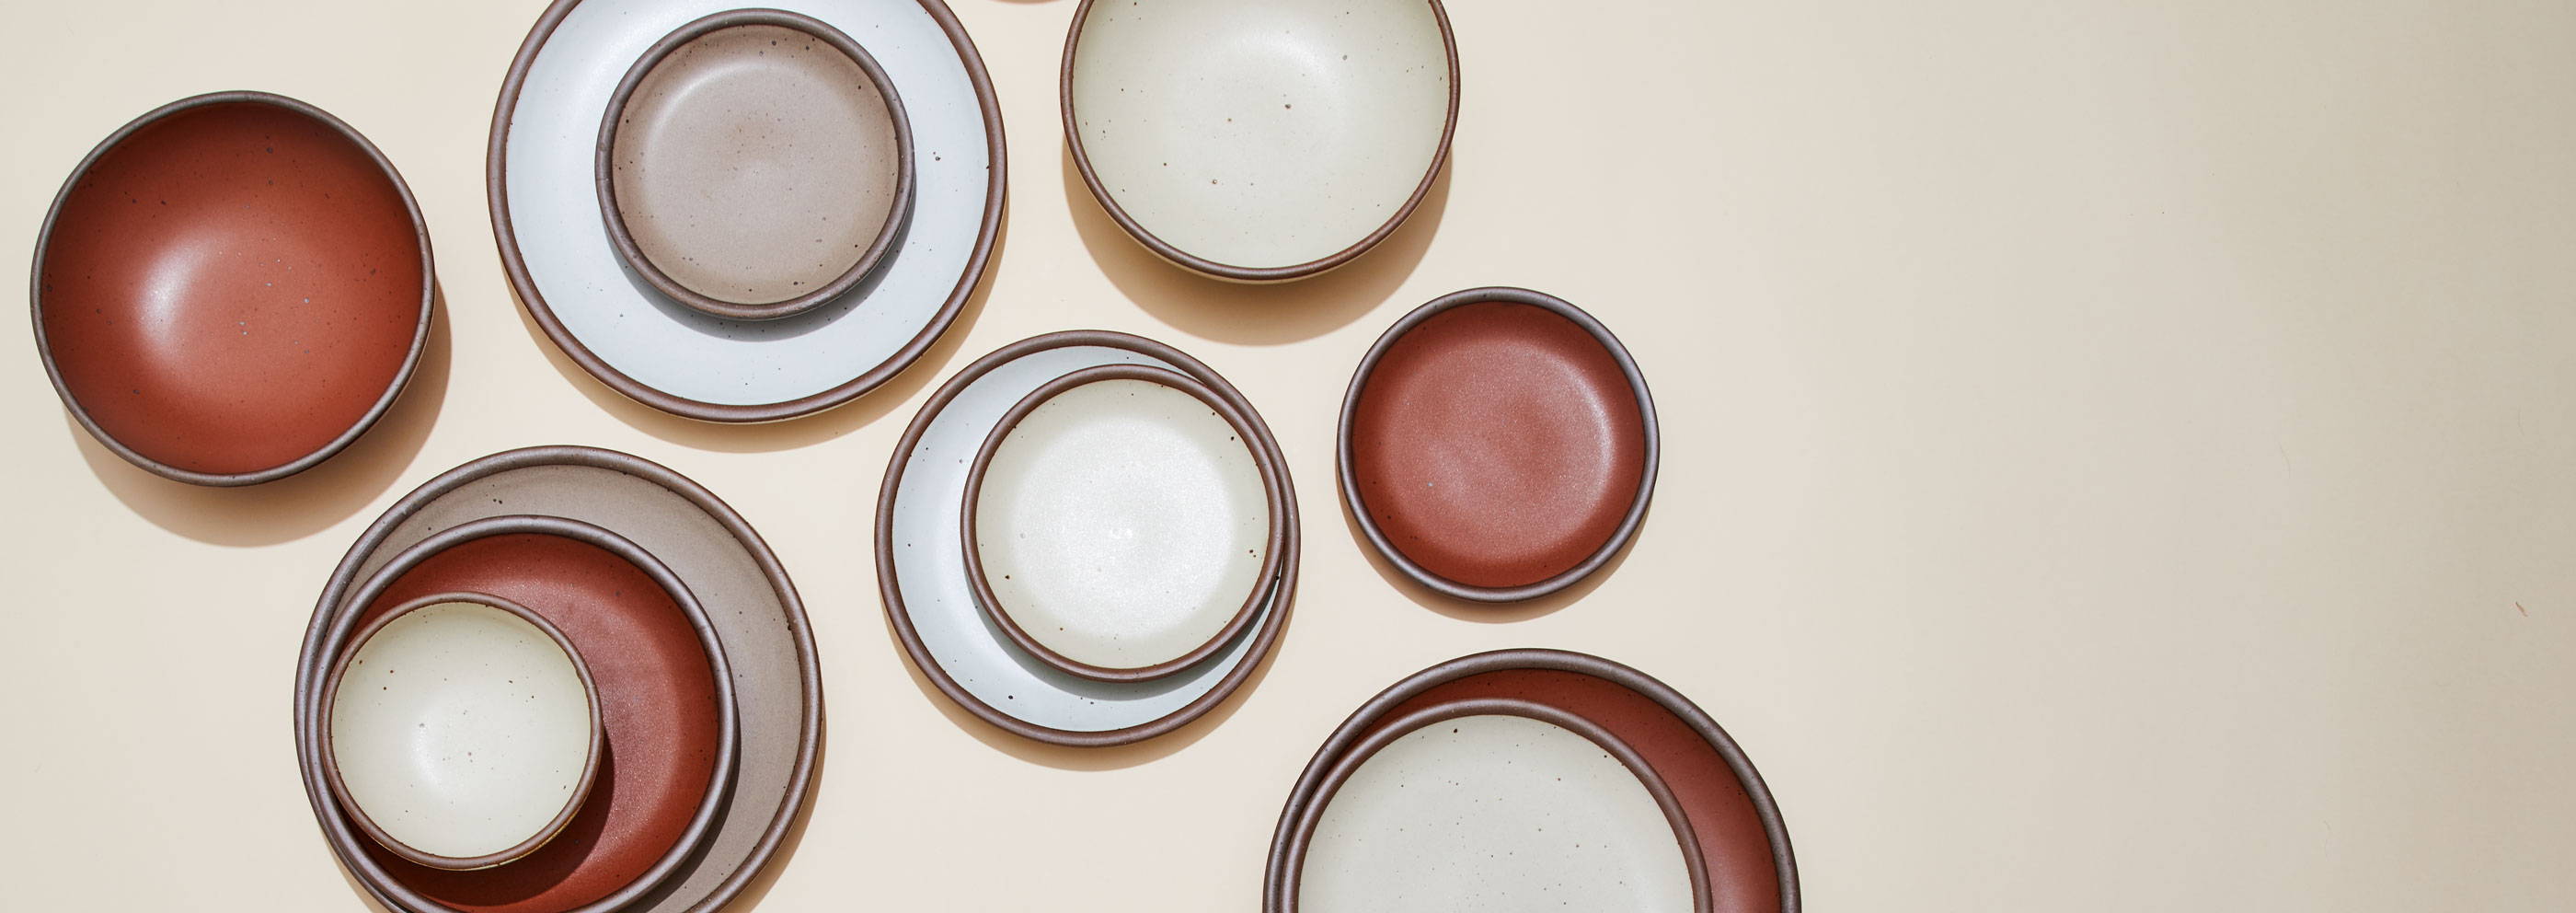 East Fork plates and bowls in core colors